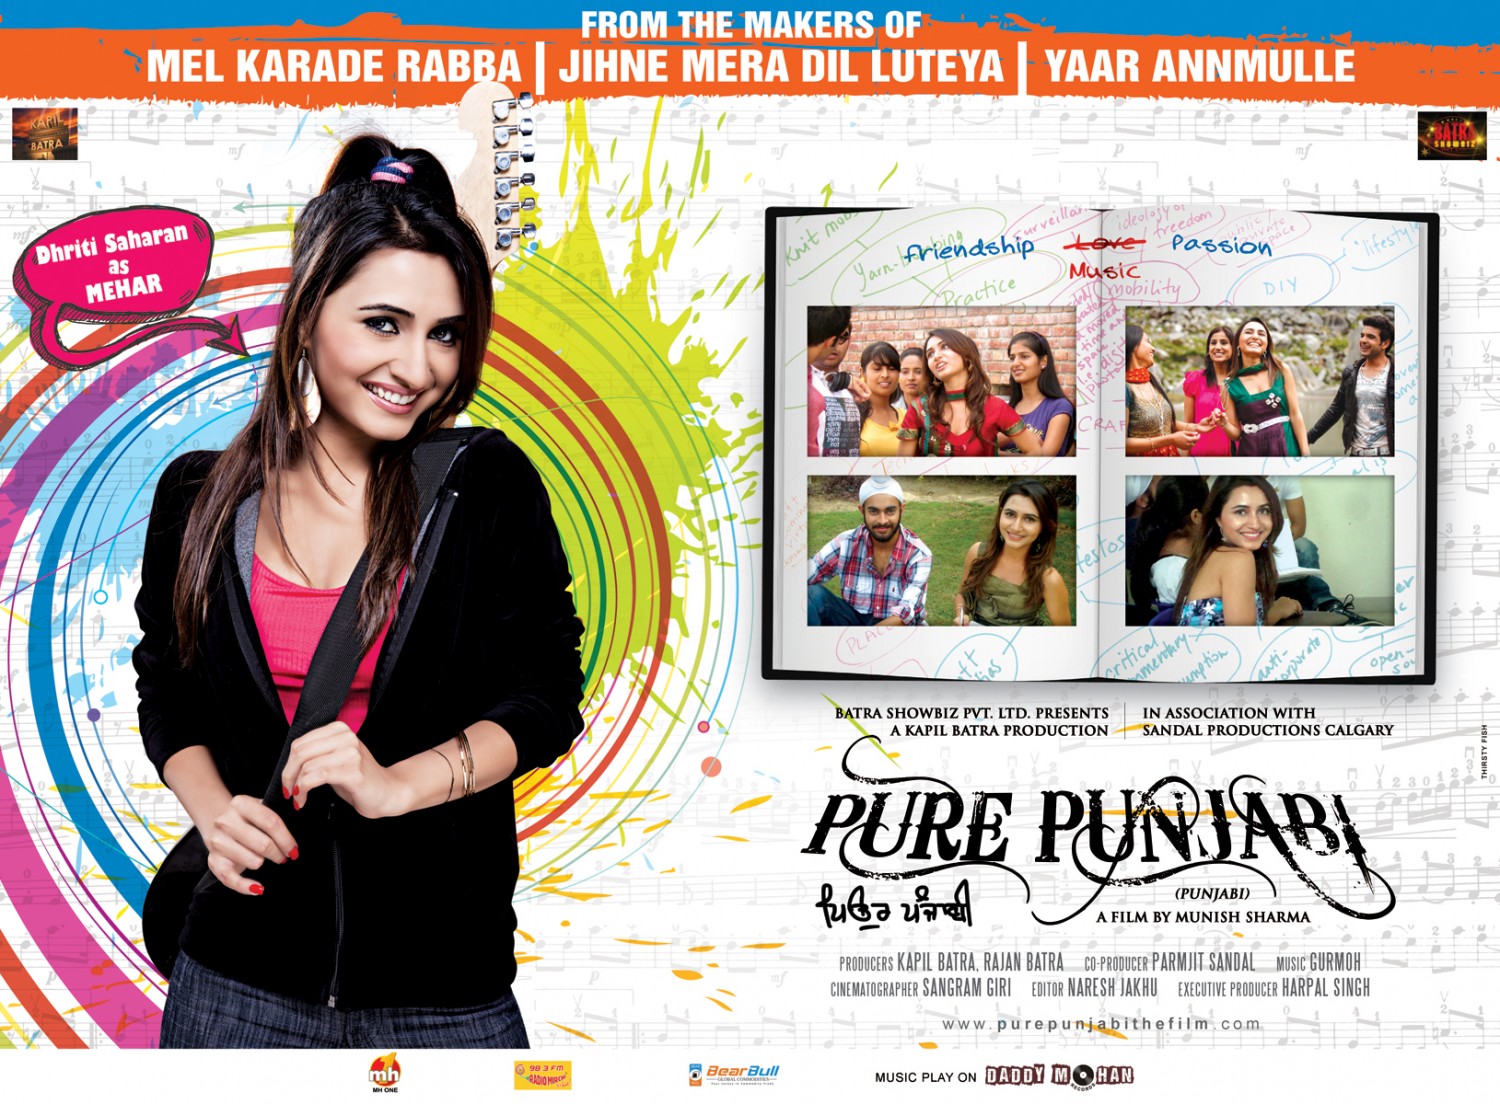 Extra Large Movie Poster Image for Pure Punjabi (#7 of 10)